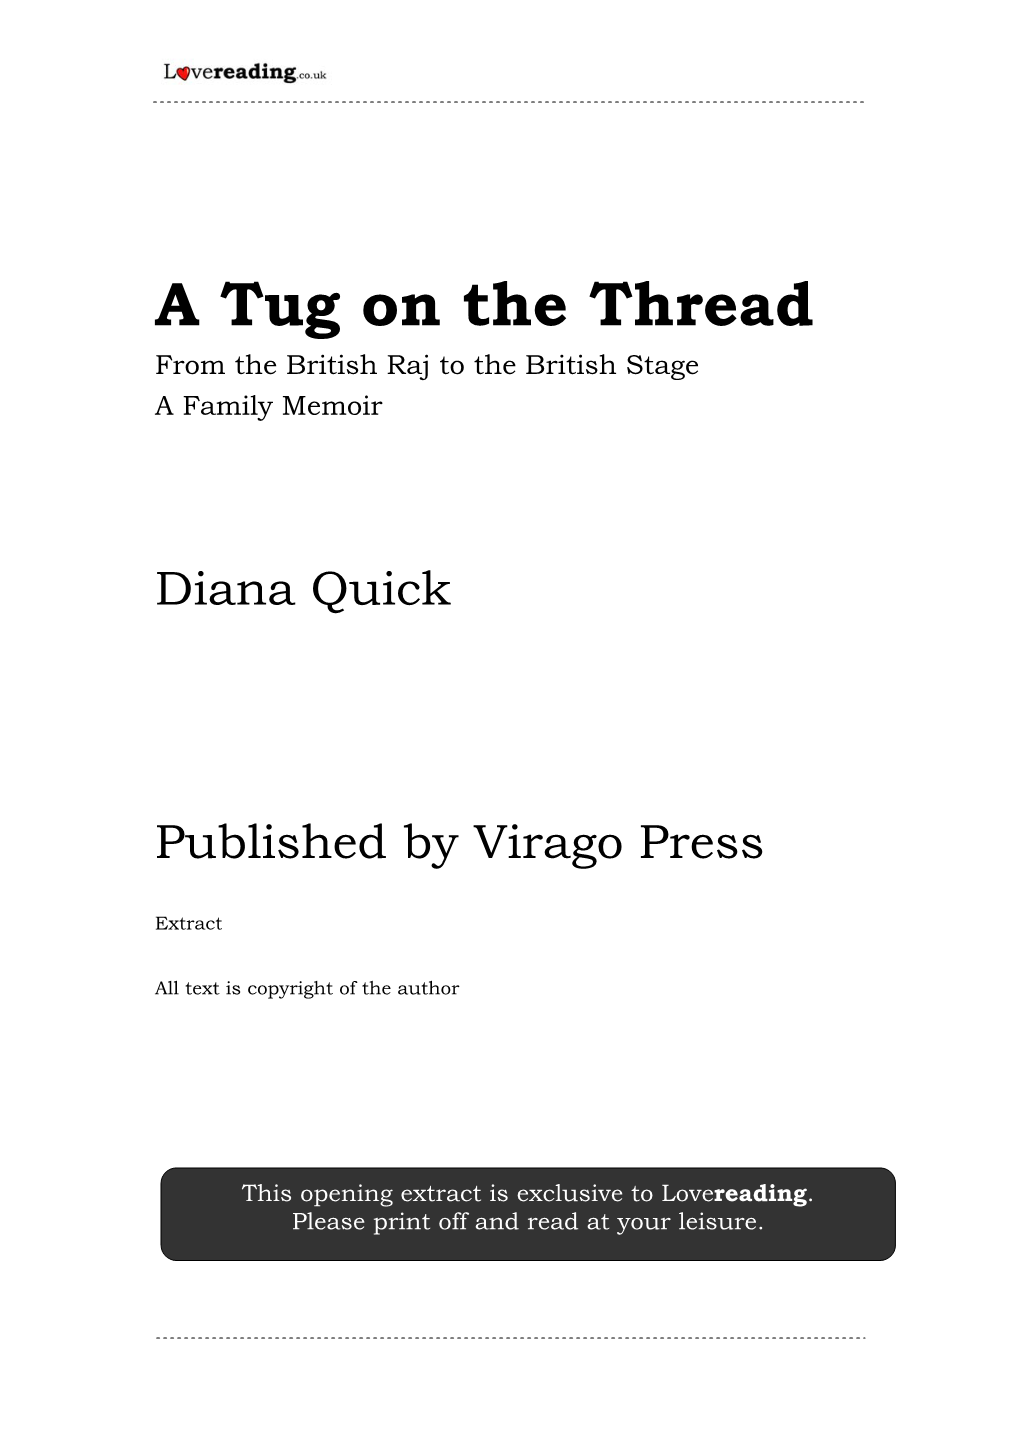 Tug on the Thread from the British Raj to the British Stage a Family Memoir